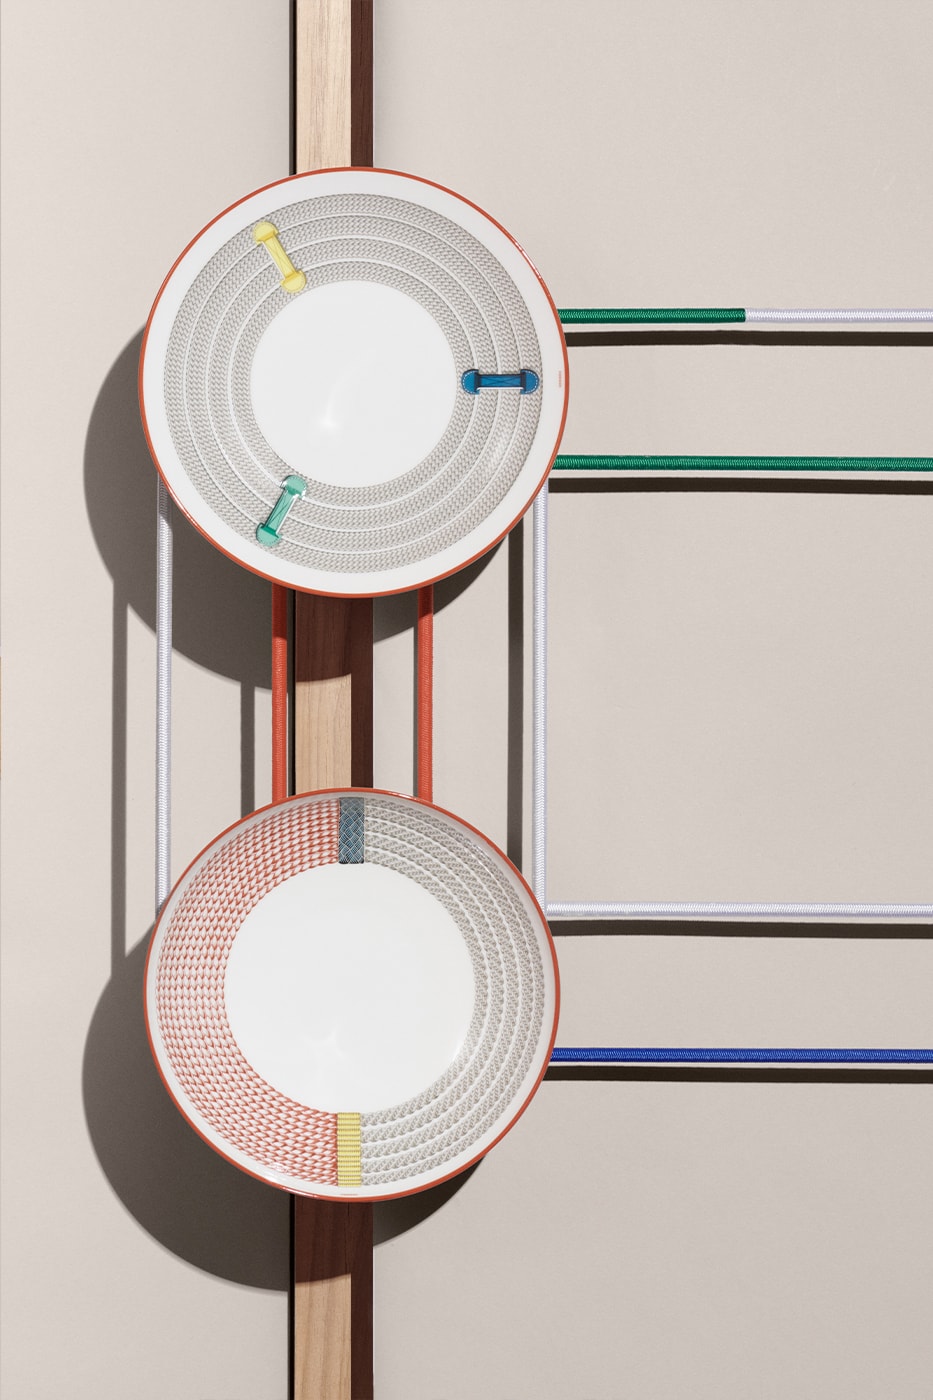 Elevate Your Home With the New Hermès Tressages Équestres Tableware Collection dinner ware mugs bowls serving plates kitchenware dining upscale luxury luxe affluent opulence wealthy rich birkin kelly